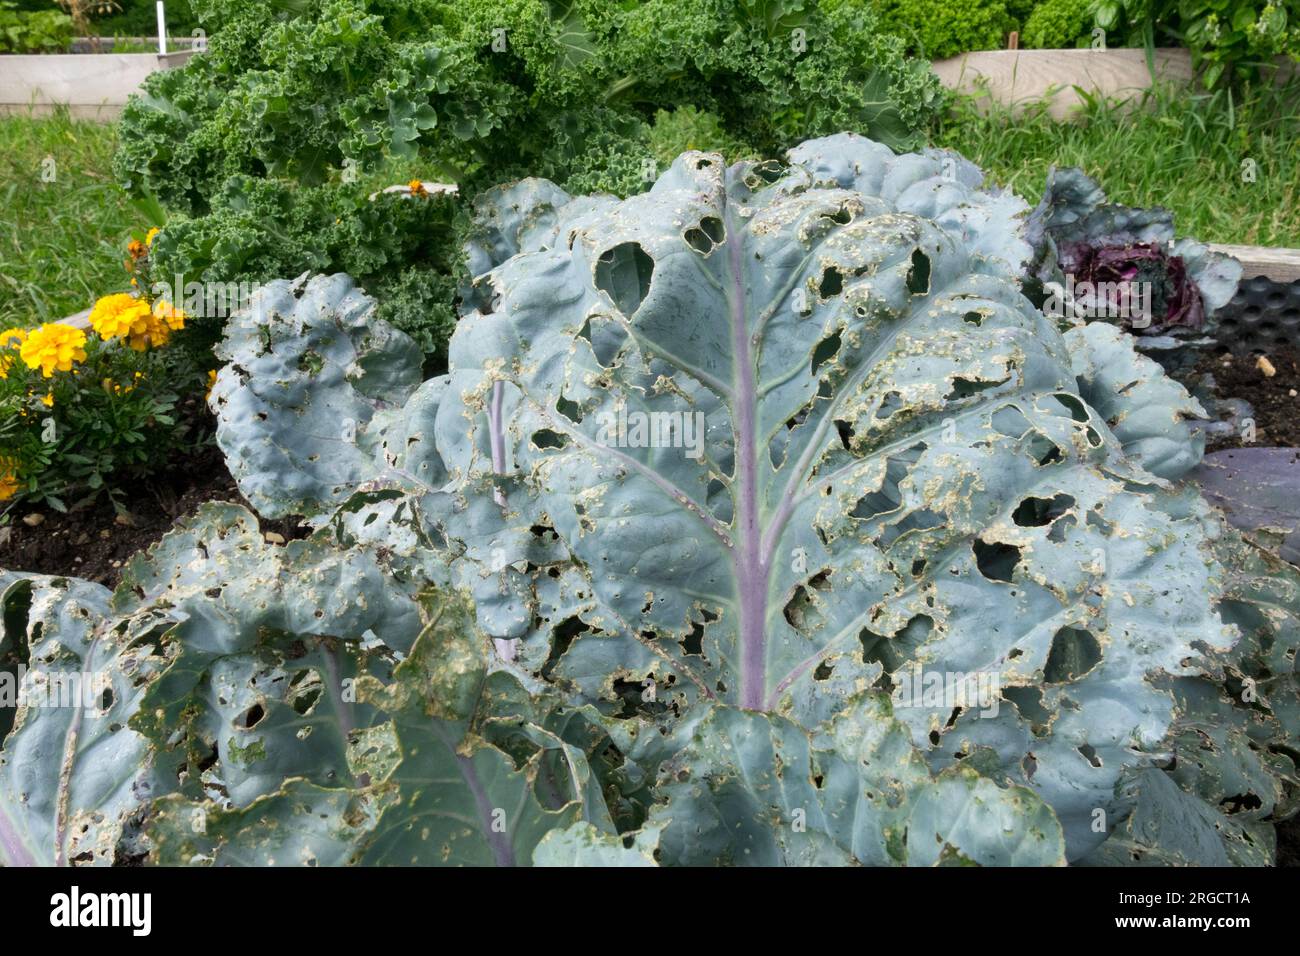 Leaves eaten by caterpillars, Damaged, Leaf, Cabbage, Brassica oleracea, pests in vegetables, Garden Stock Photo